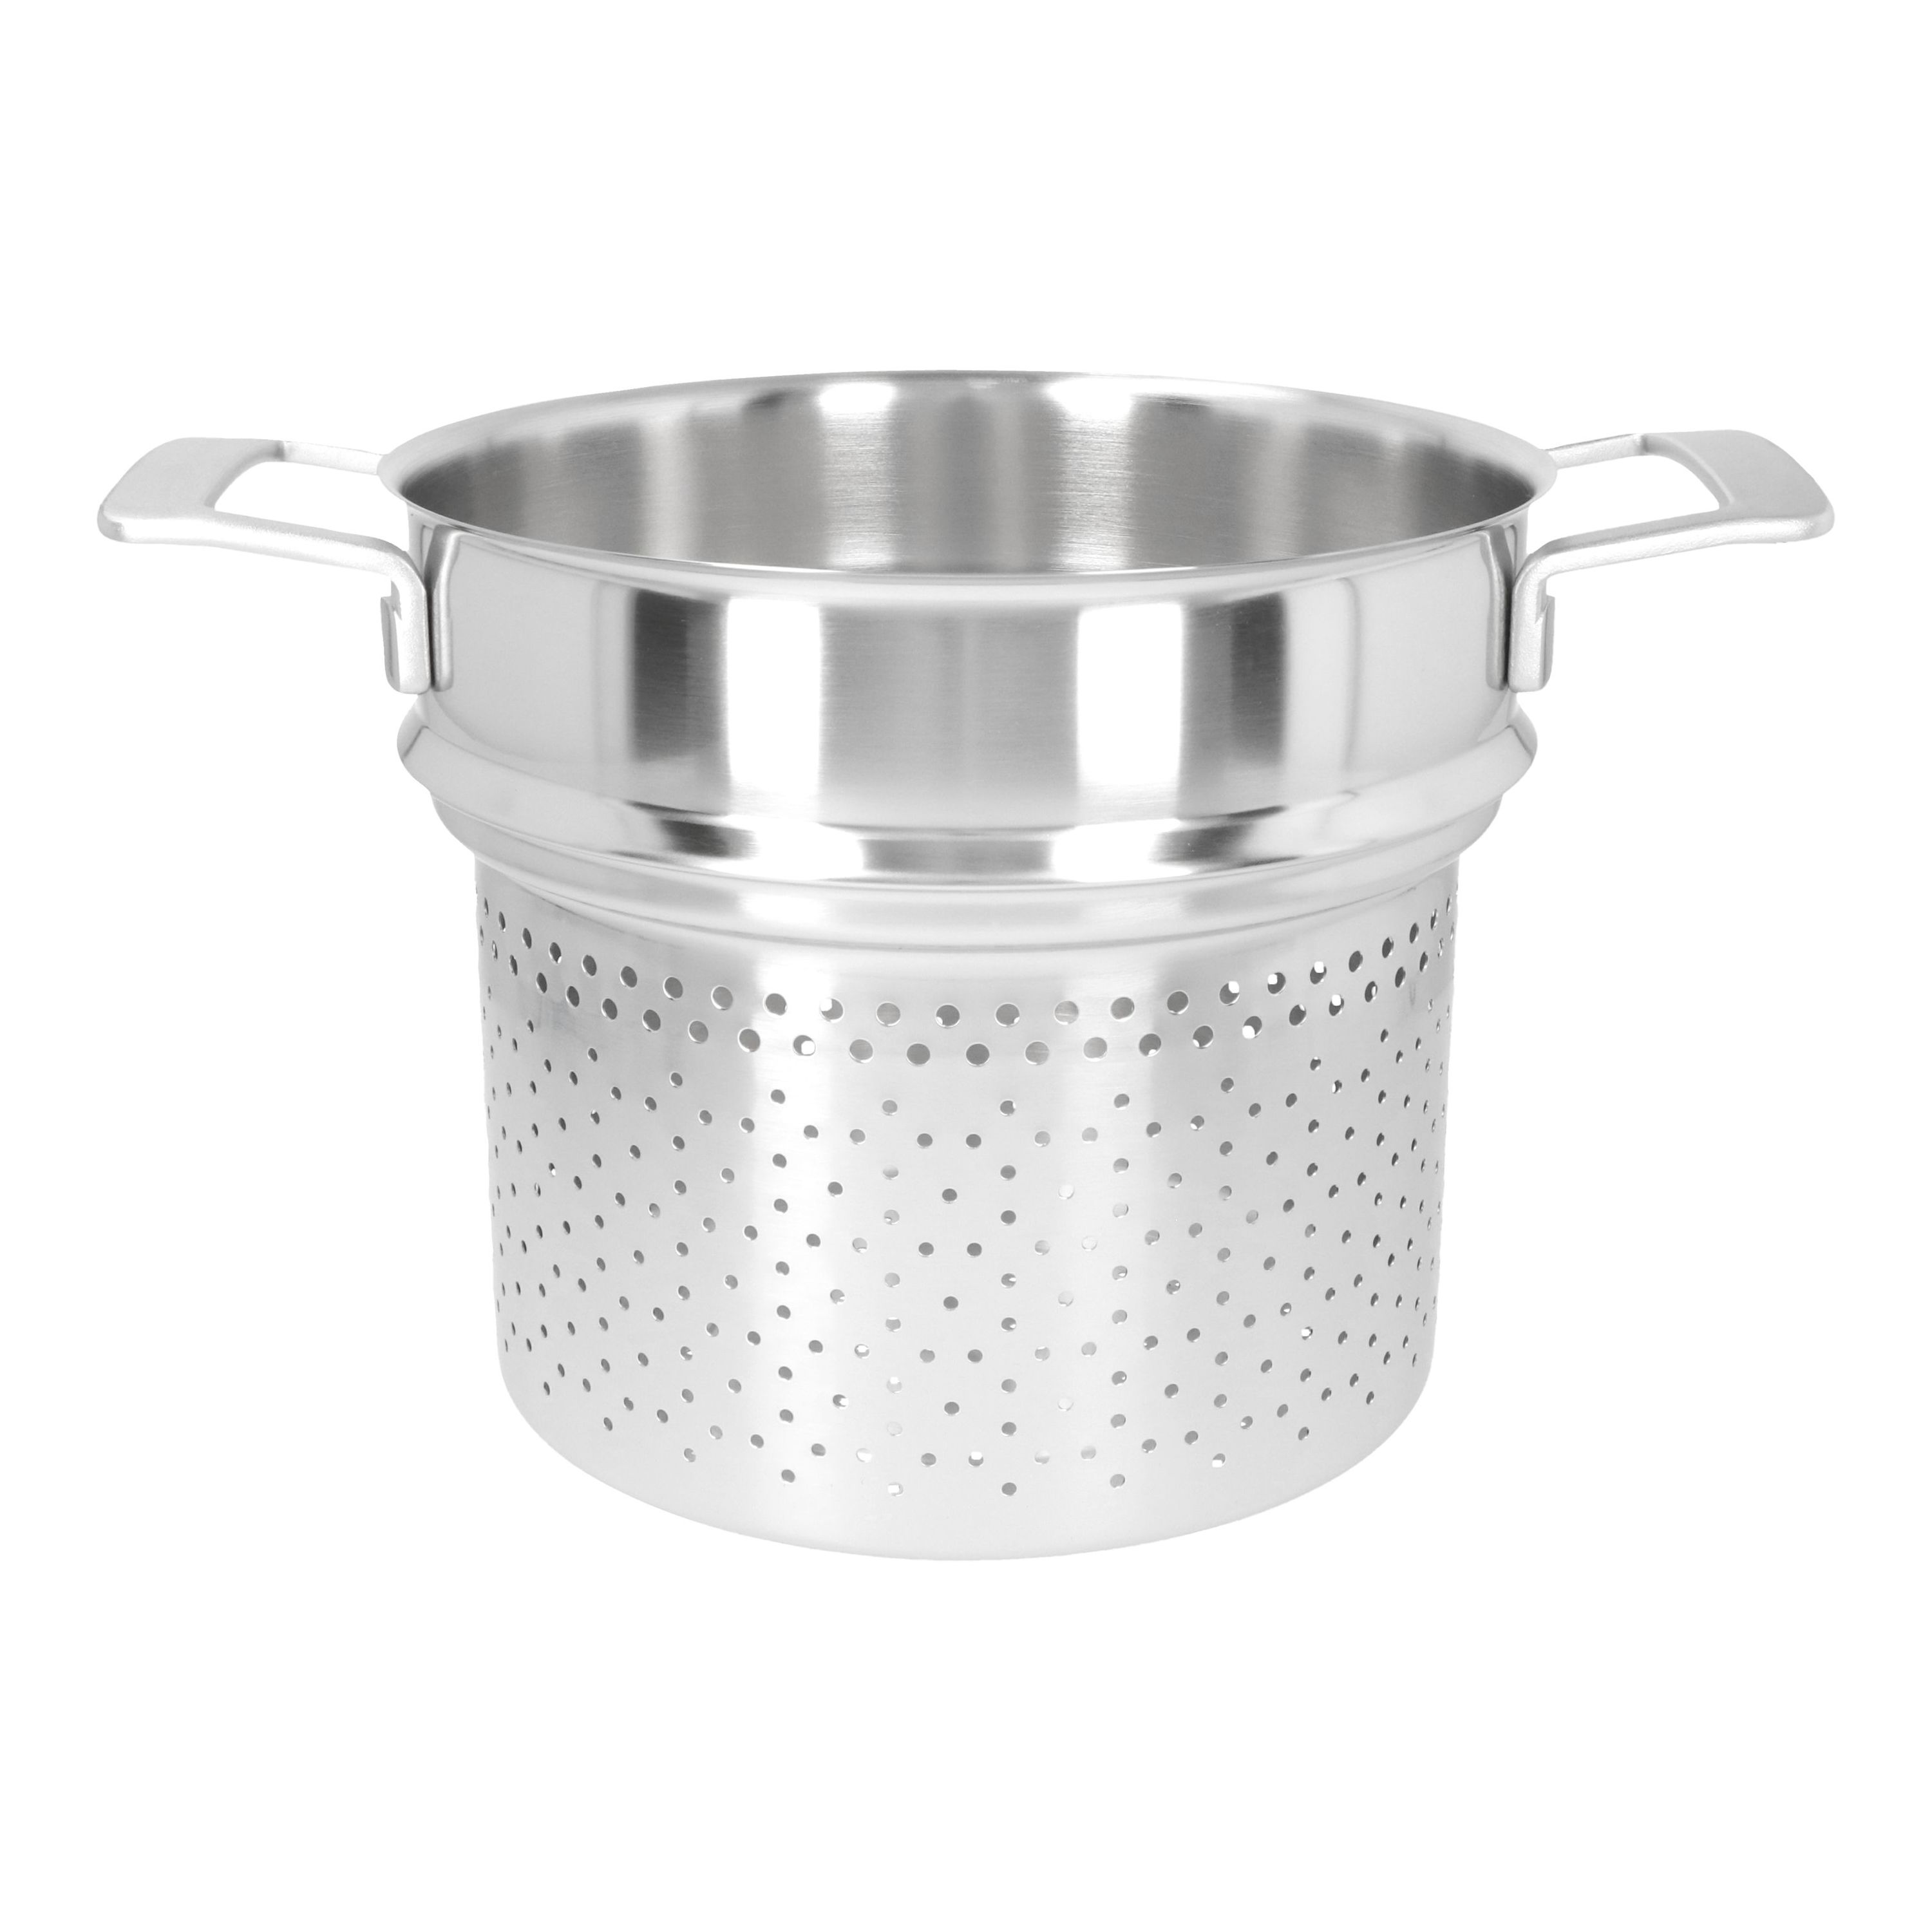 3/4/5 Stainless Steel Pasta Cooker Pot,Stainless Steel Pasta Pot and Insert  Strainer Basket Cookware for Home Kitchen Restaurant Commercial Cooking